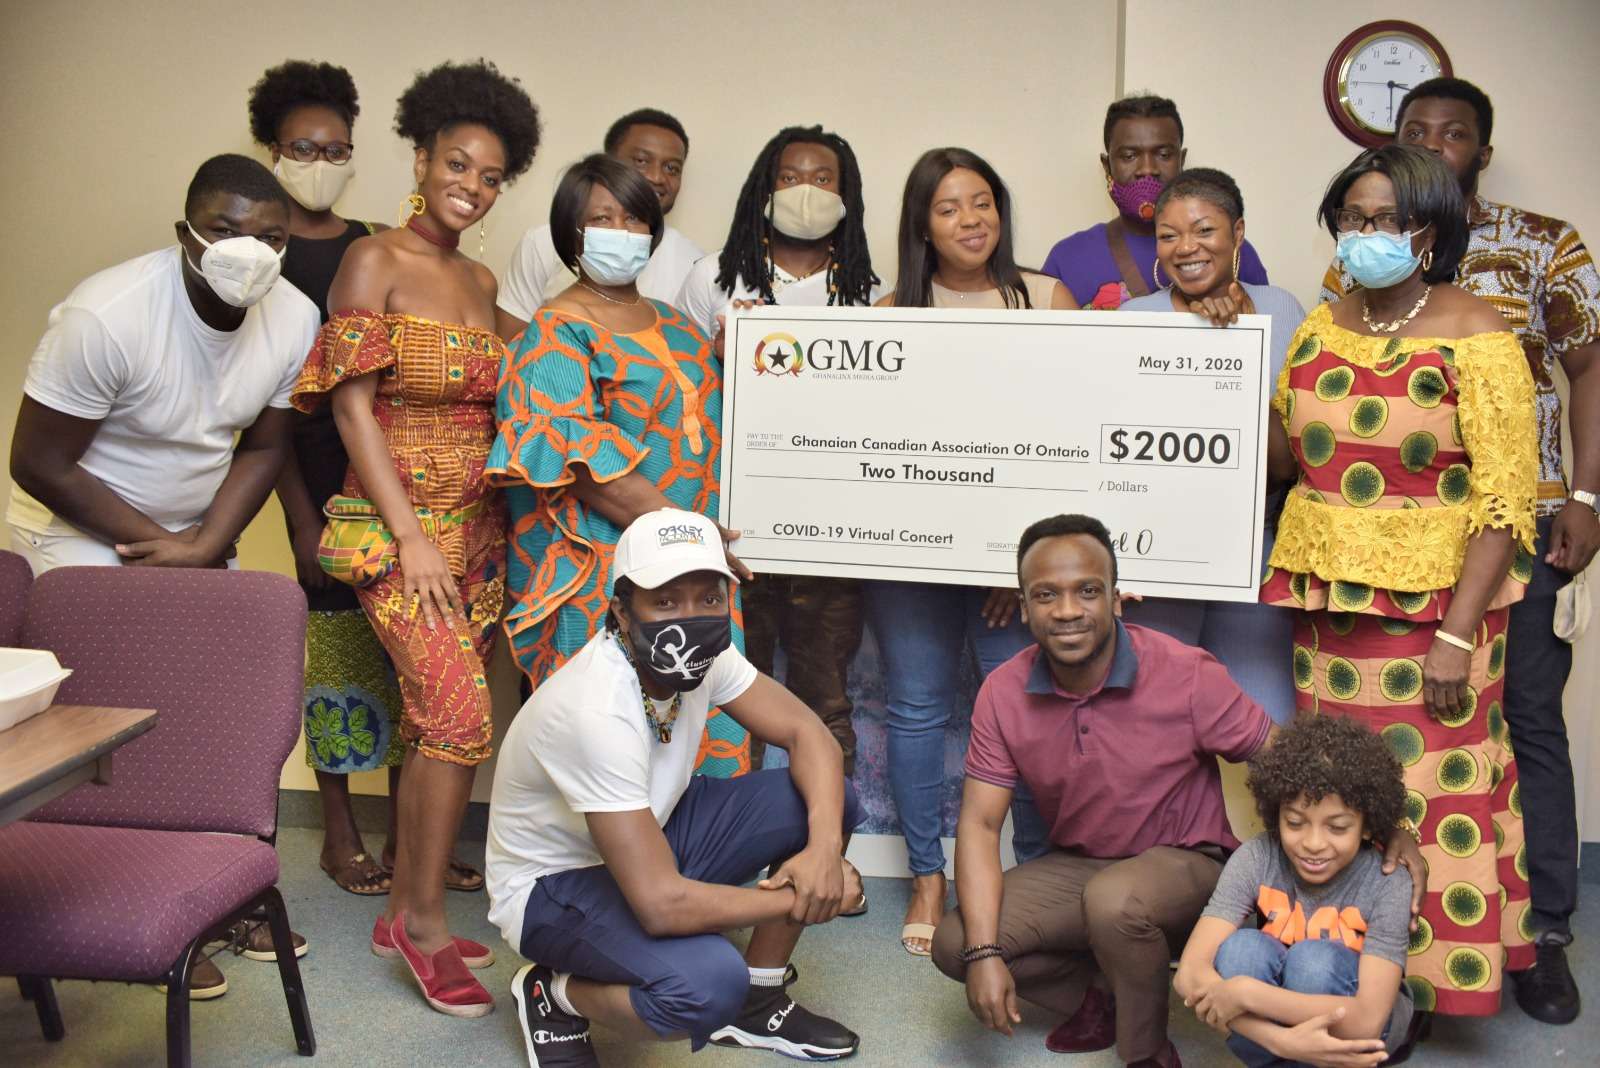 GHANALINX MEDIA GROUP DONATES PROCEEDS FROM COVID-19 VIRTUAL CONCERT TO GCAO